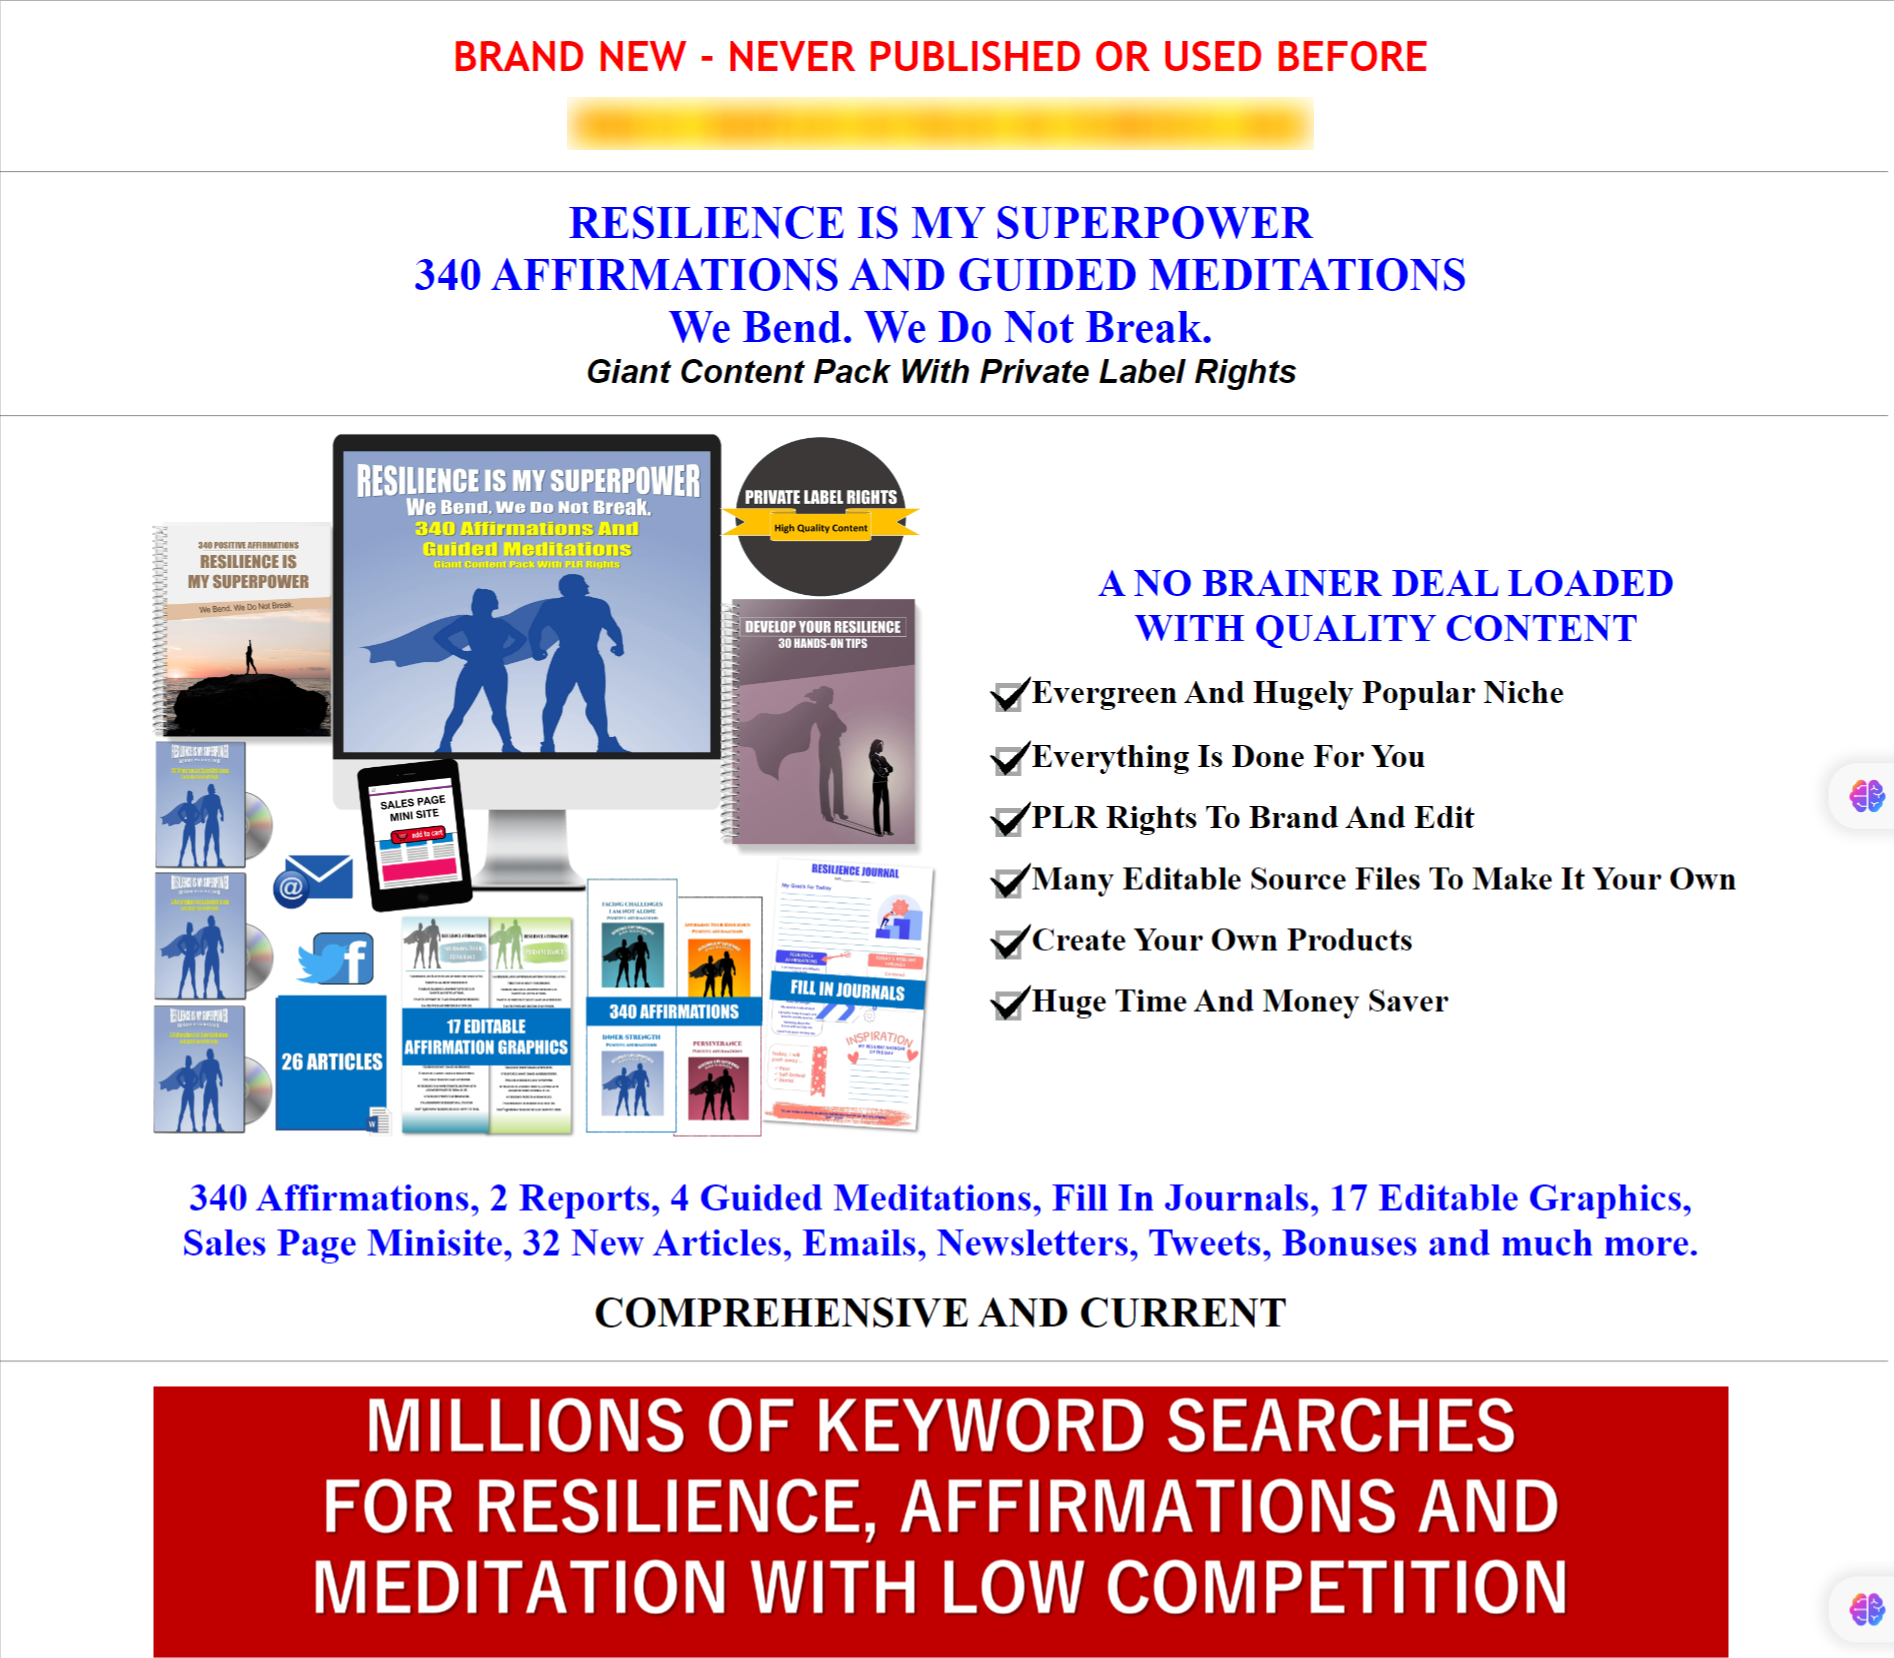 340 Resilience Affirmations Guided Meditations Content Pack PLR Rights [Quality Giant PLR] Resilience Is My Superpower - 340 Affirmations and Guided Meditations [PLR REVIEW]